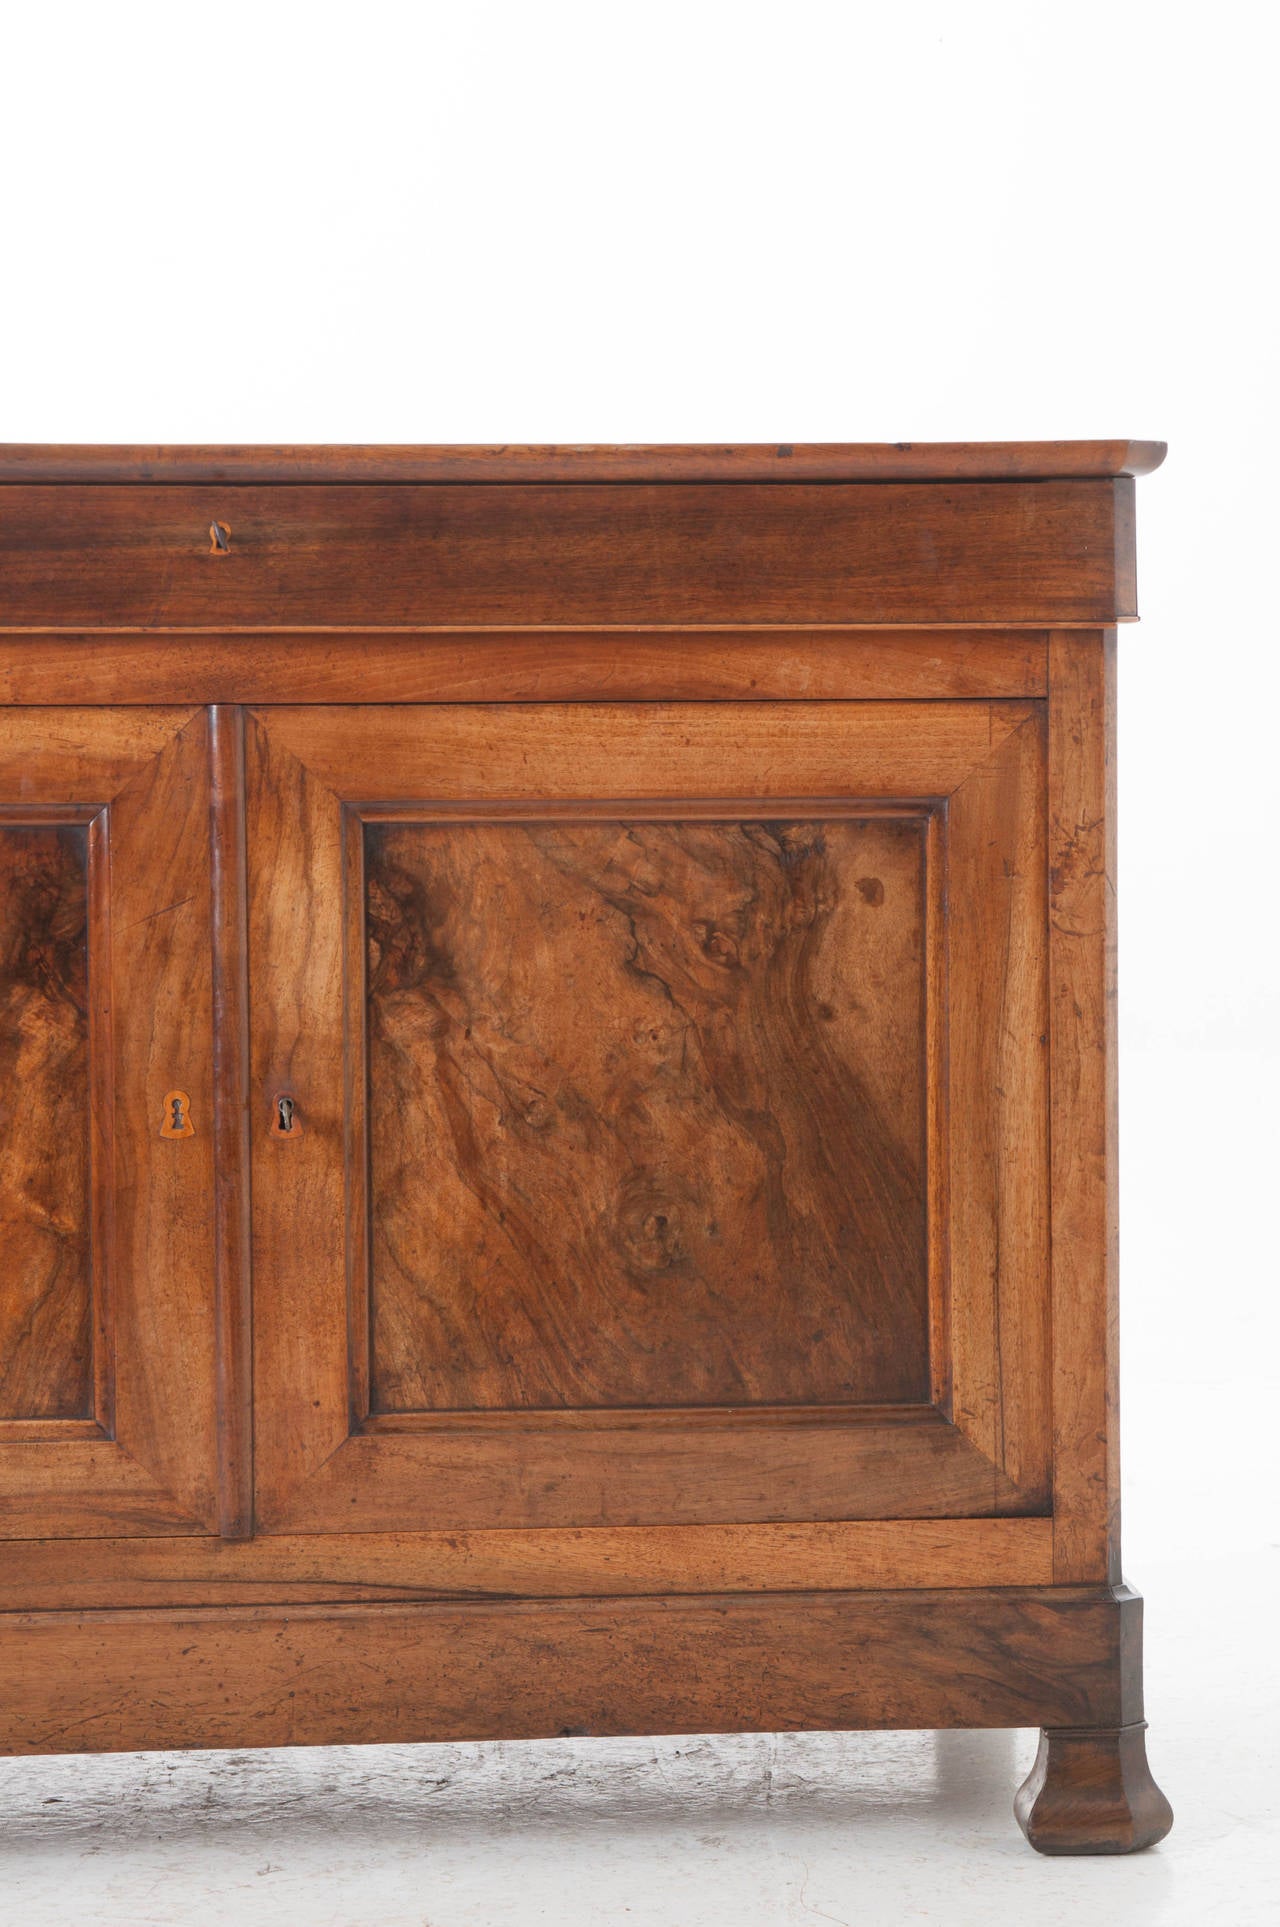 A gorgeous Louis Philippe buffet with a single drawer and two burl walnut doors. The simple lines of this antique allow you to enjoy the wood and patina to the fullest! A breathtaking buffet that would look faboulus in any interior! See the detailed